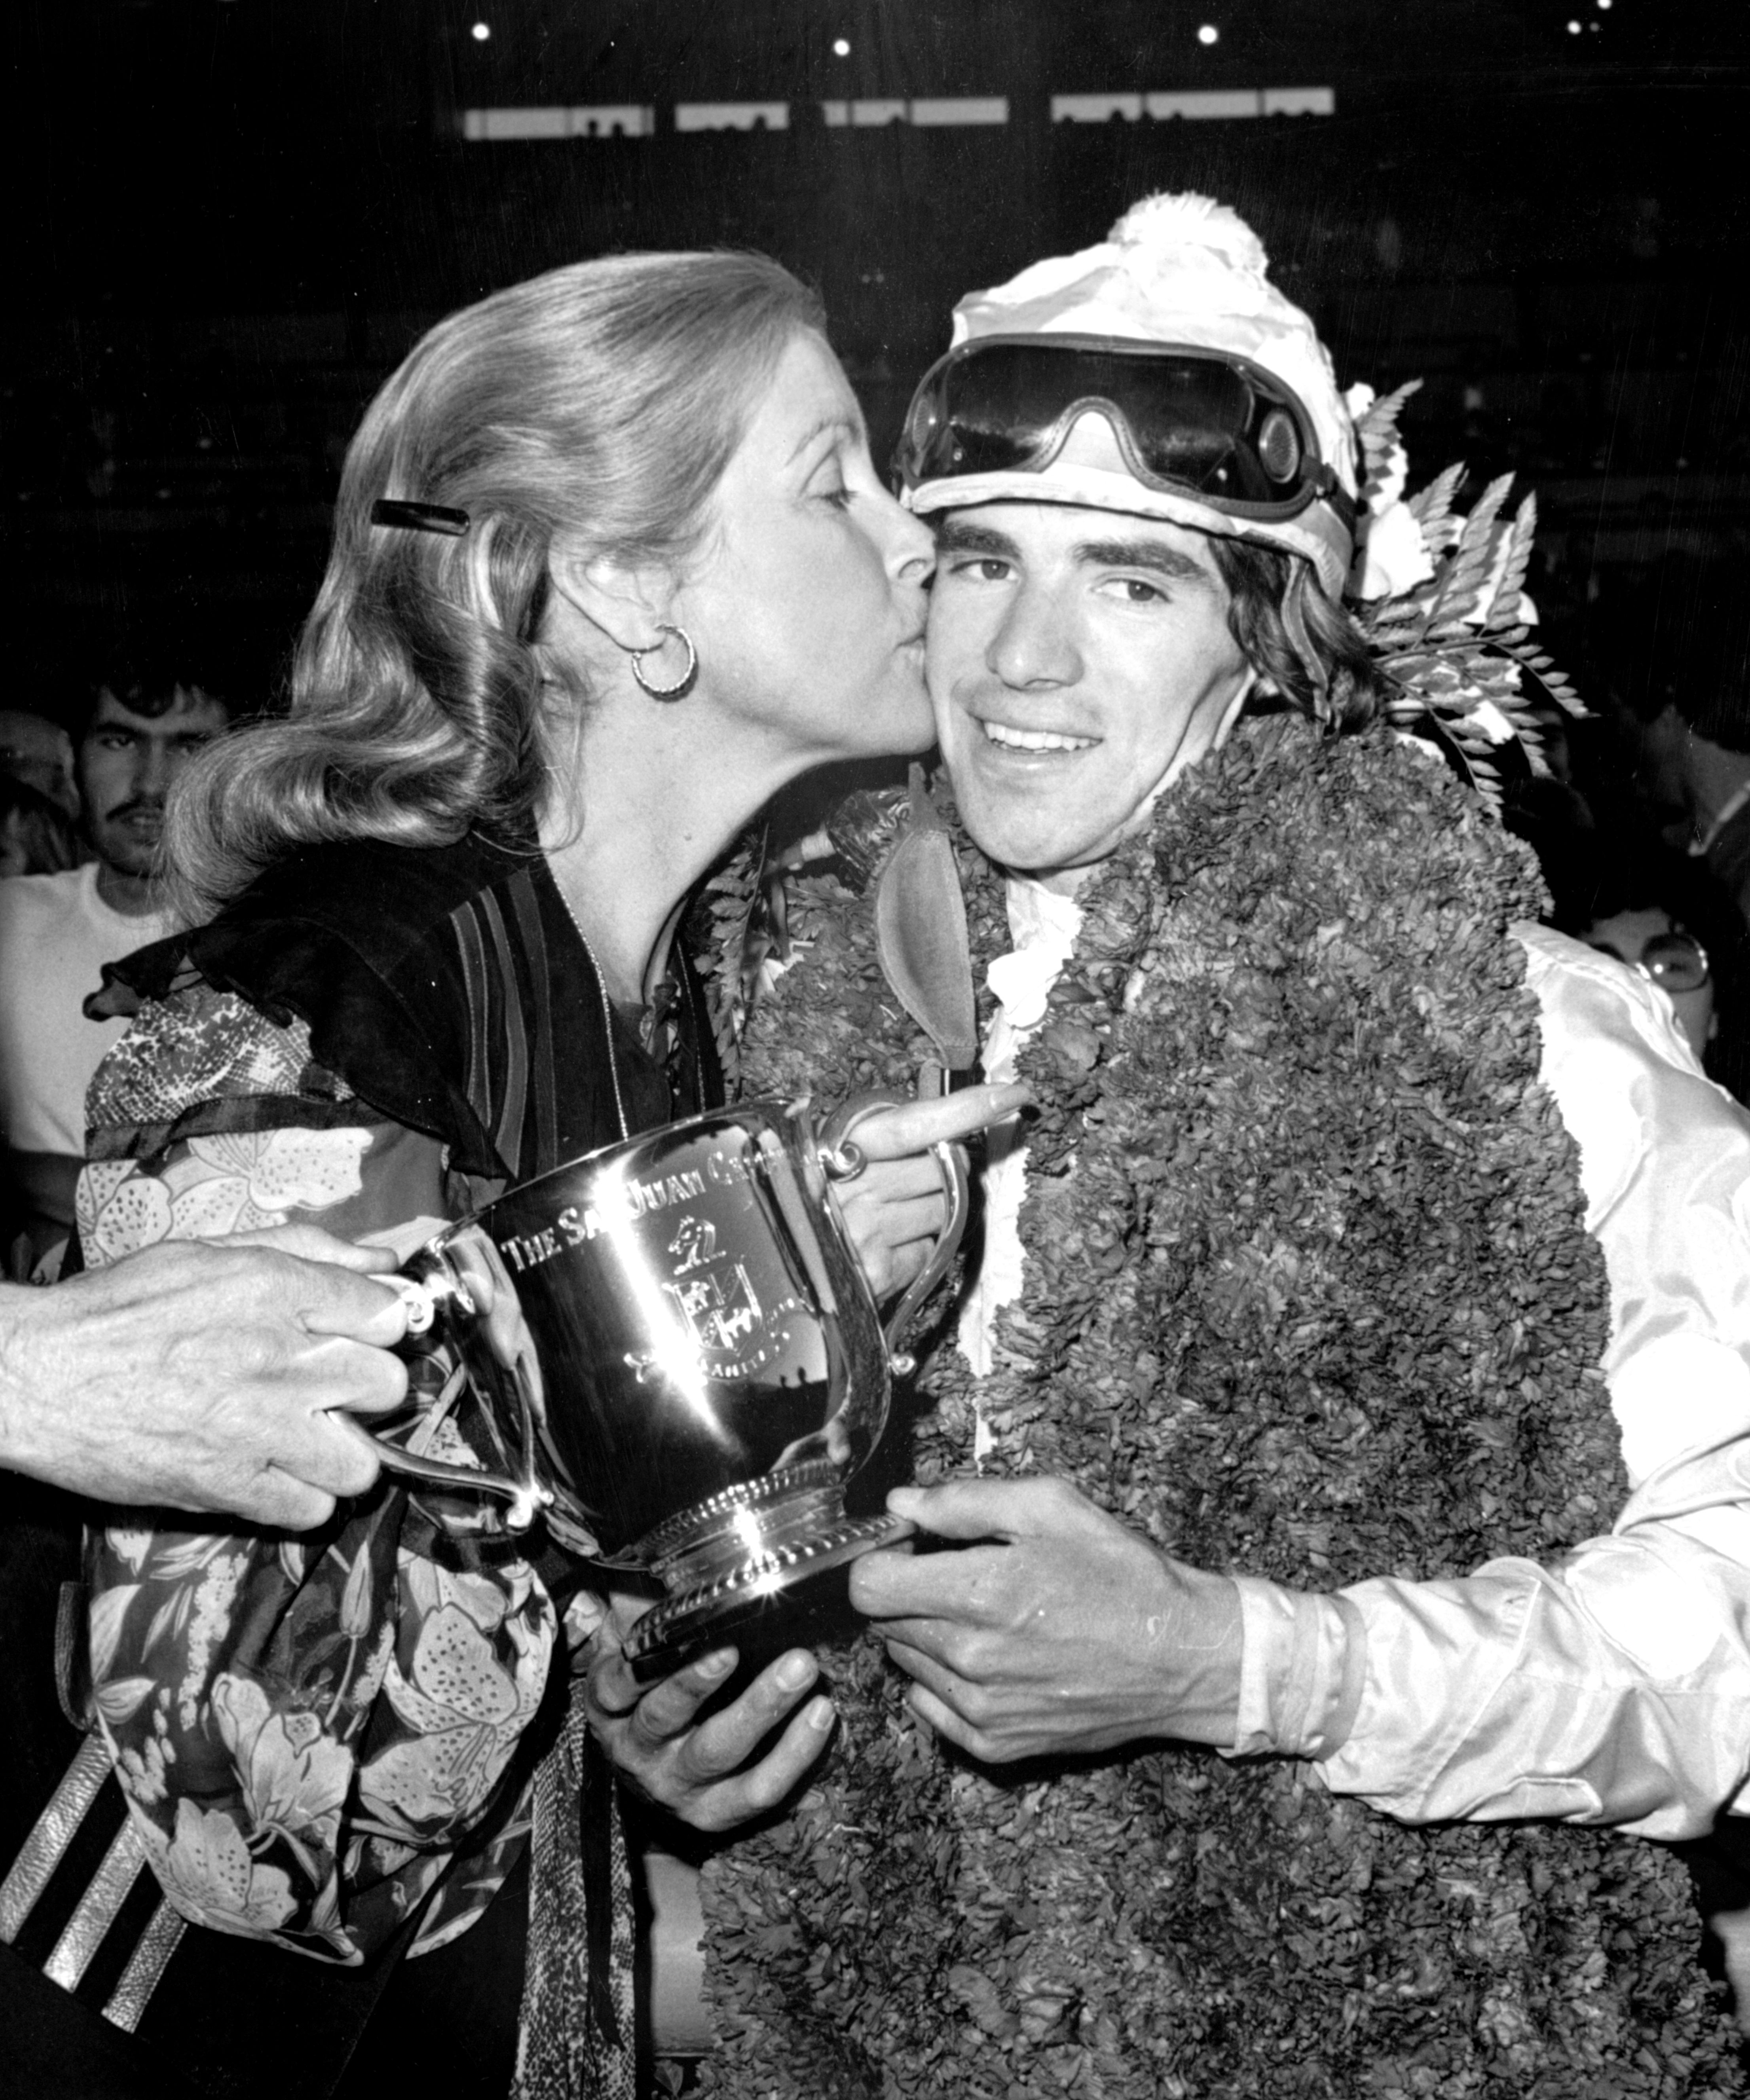 Darrel McHargue receives a kiss from Jacqueline Getty after winning the 1977 San Juan Capistrano Handicap (Keeneland Library Thoroughbred Times Collection)